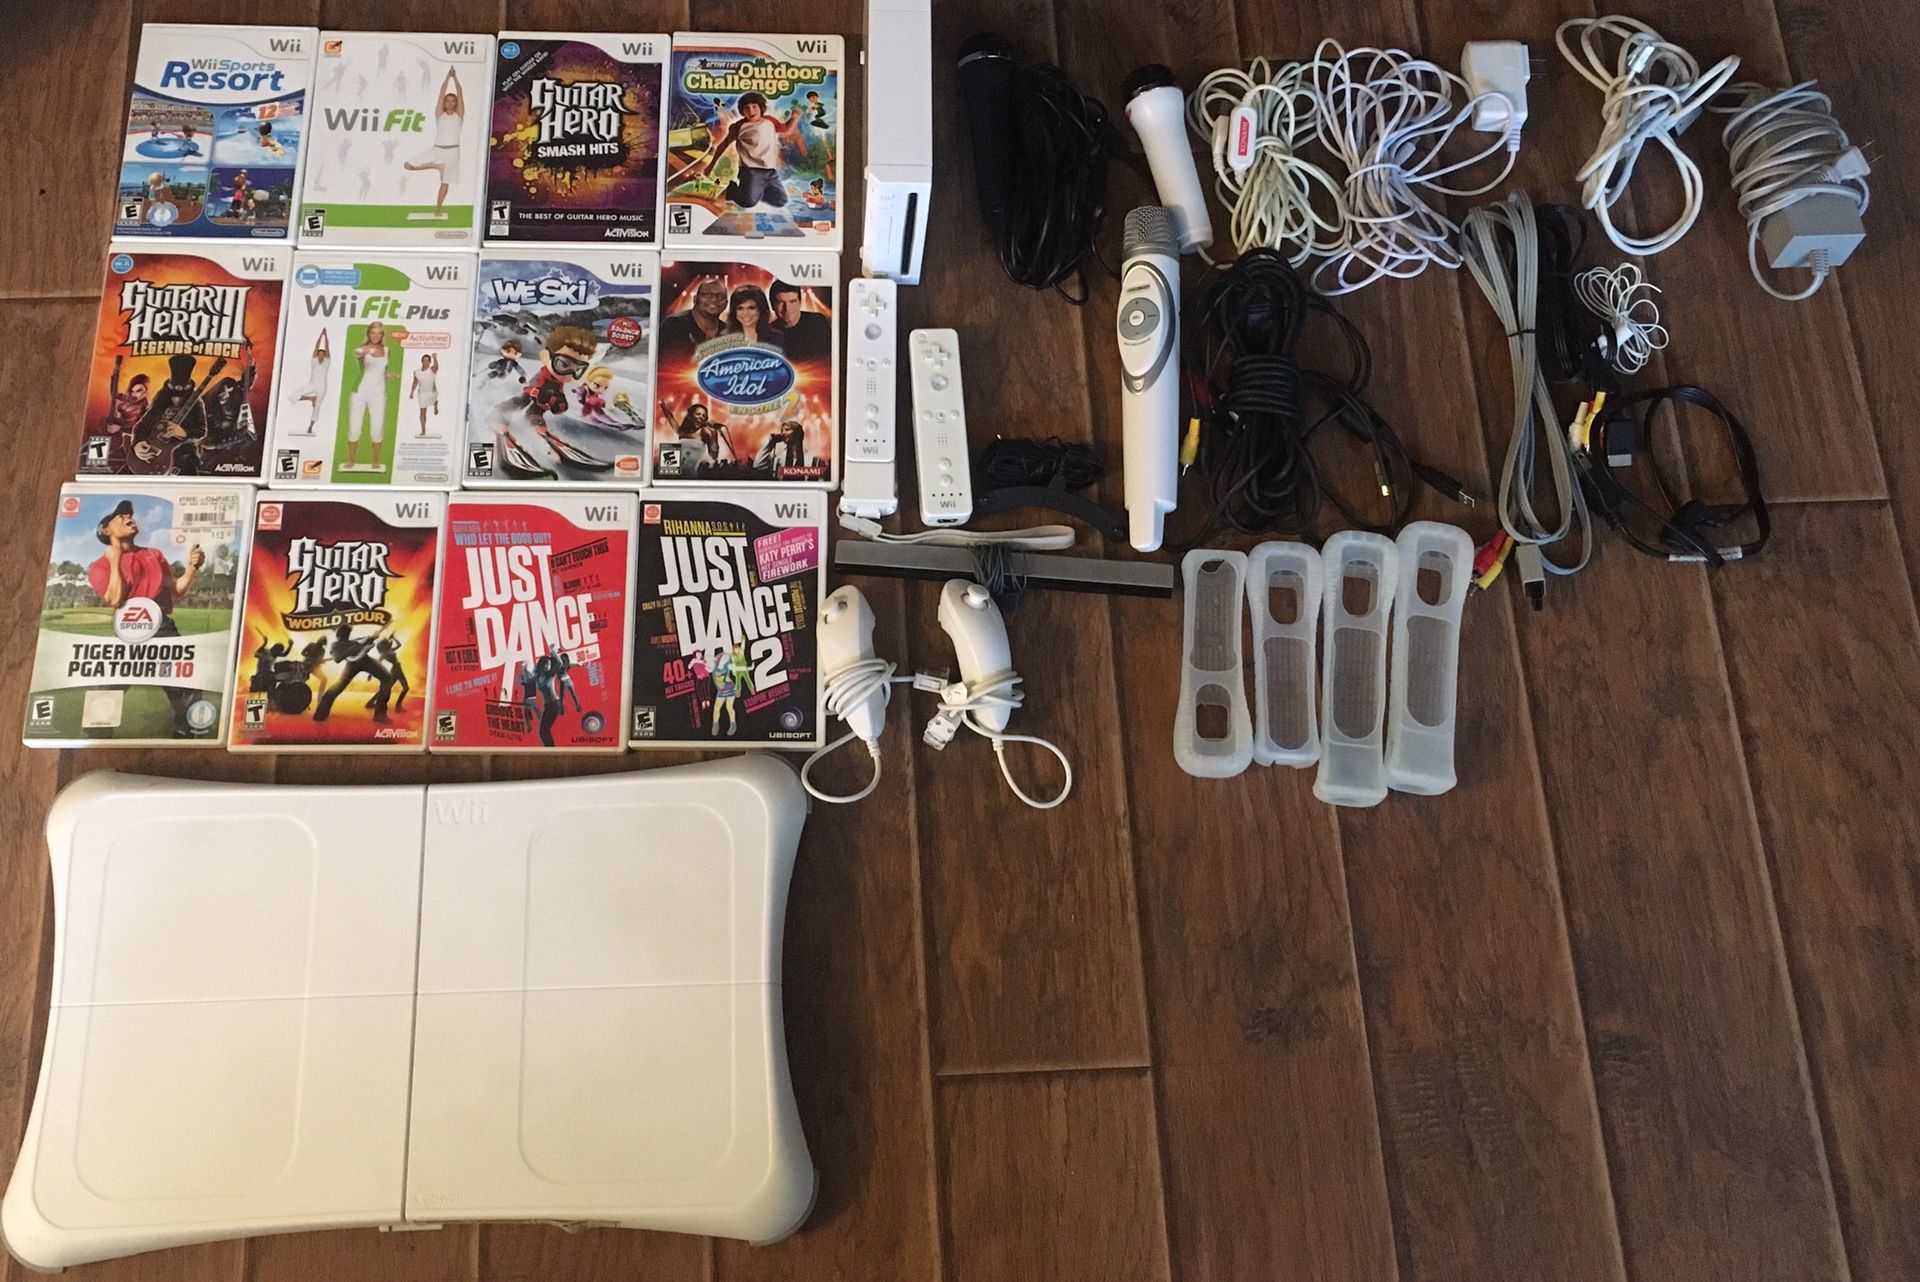 Nintendo Wii, 9 Video Games, Wii Fit Board, and USB Wired Karaoke Gaming Microphone